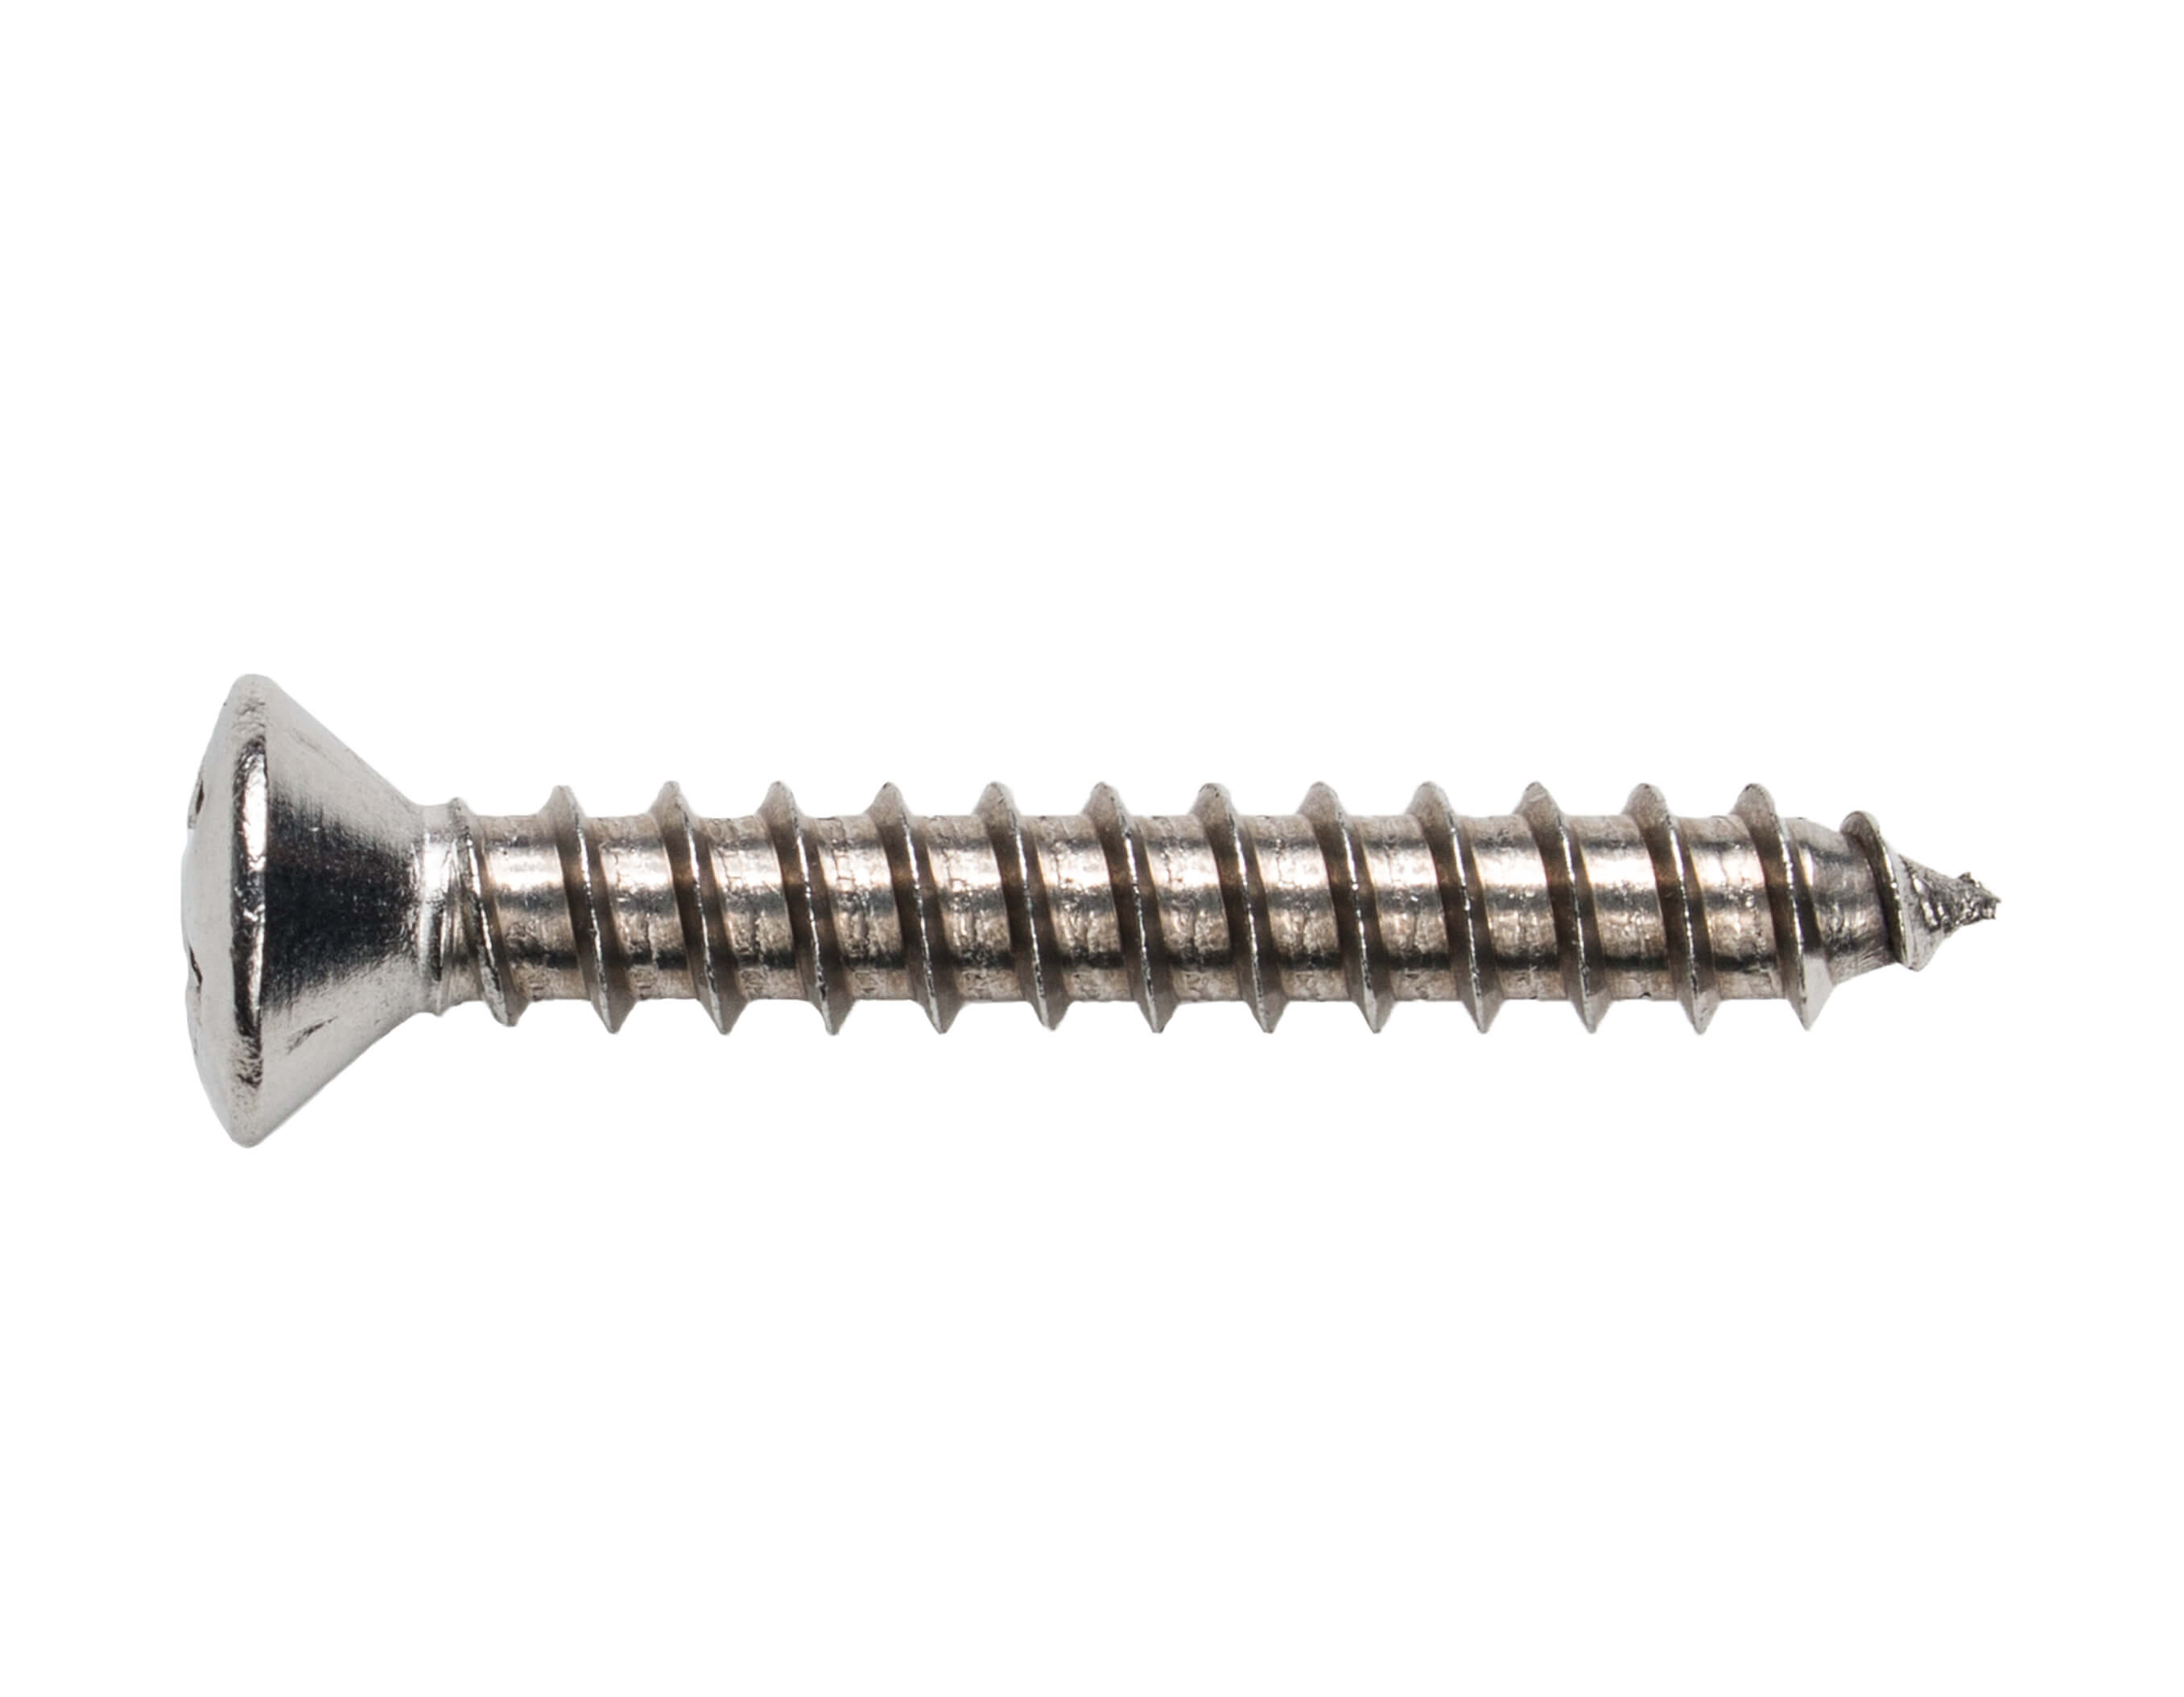 4.2X32 SMS (TAPPING) SCREW OVAL PH 18.8 SS